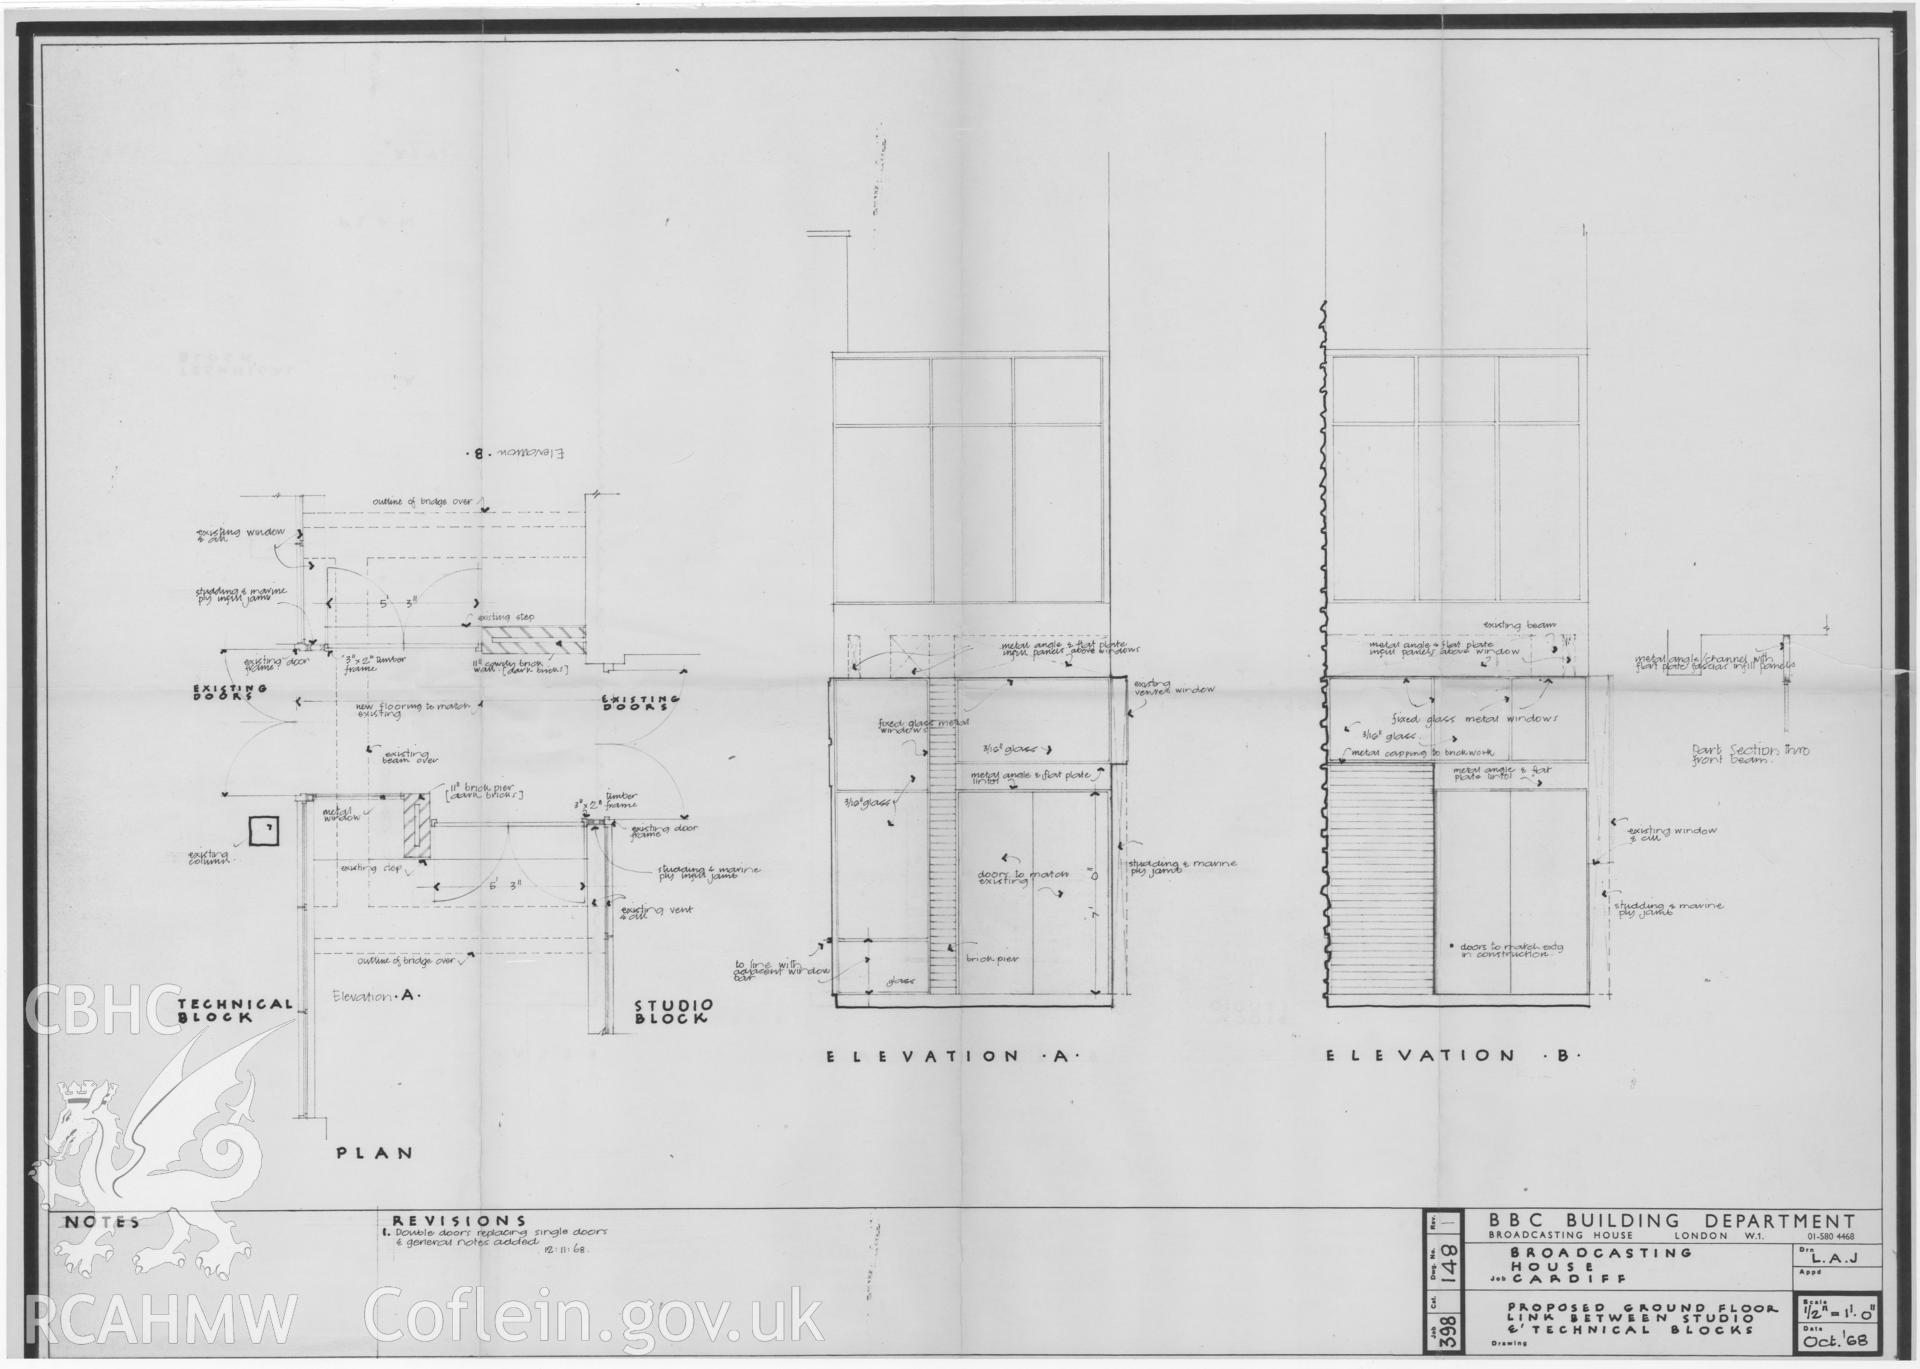 Cardiff Broadcasting House, Llandaff - plan and elevation drawing of the proposed ground floor link between studios, October 1968. Drawing No.148.